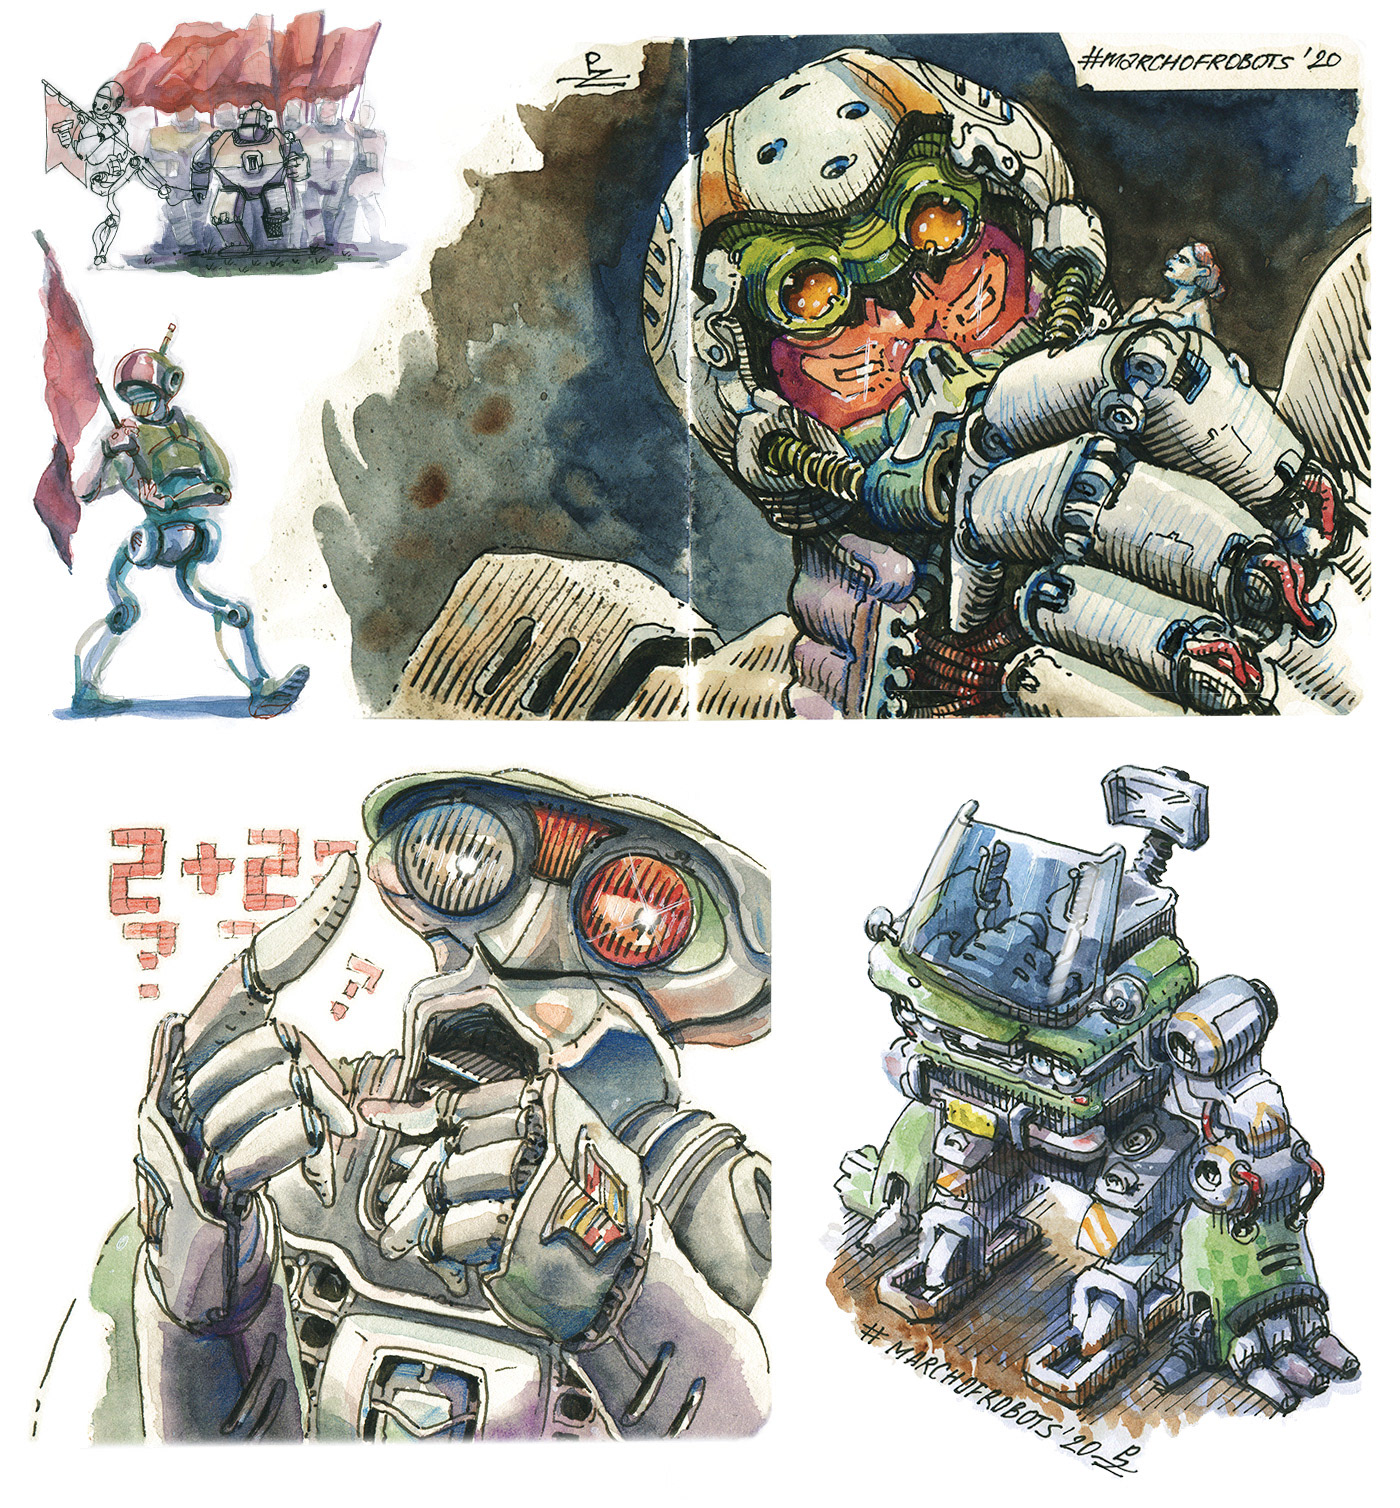 Character design  concept art Editorial Illustration hand drawn ILLUSTRATION  March of robots robot sci-fi watercolor Cyberpunk